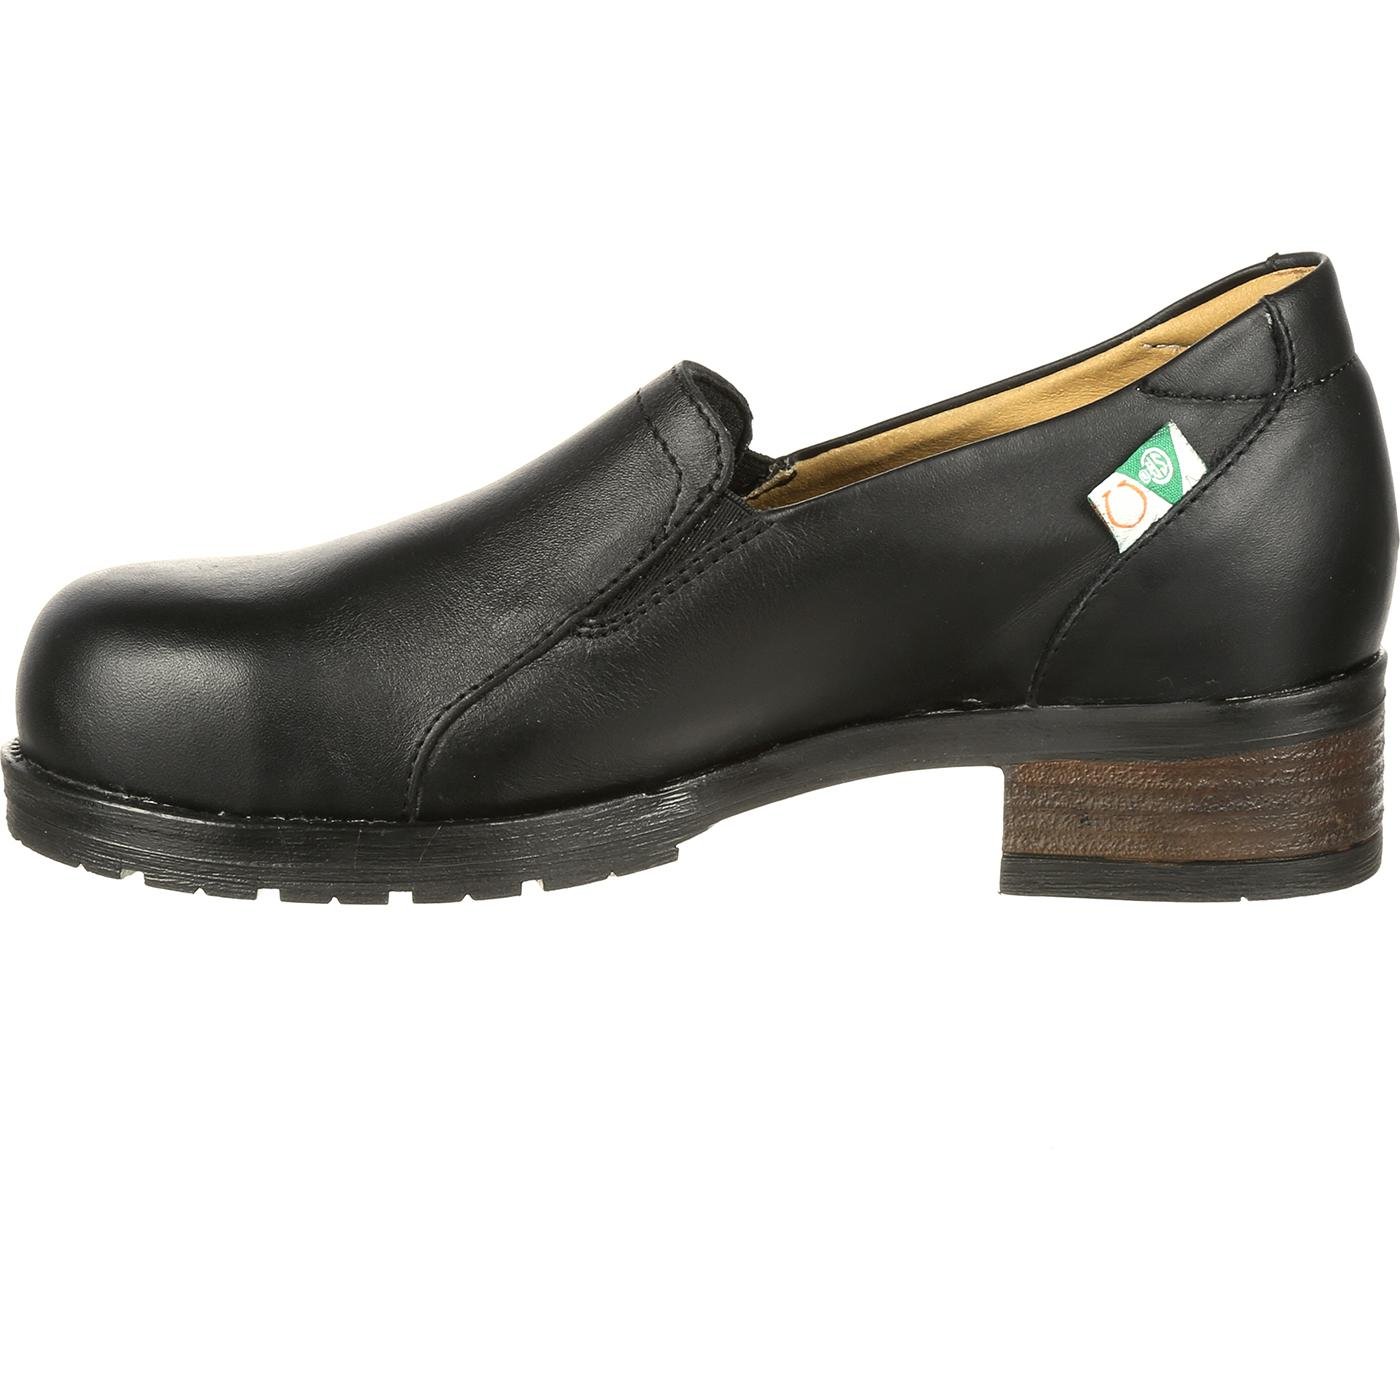 csa approved safety shoes womens